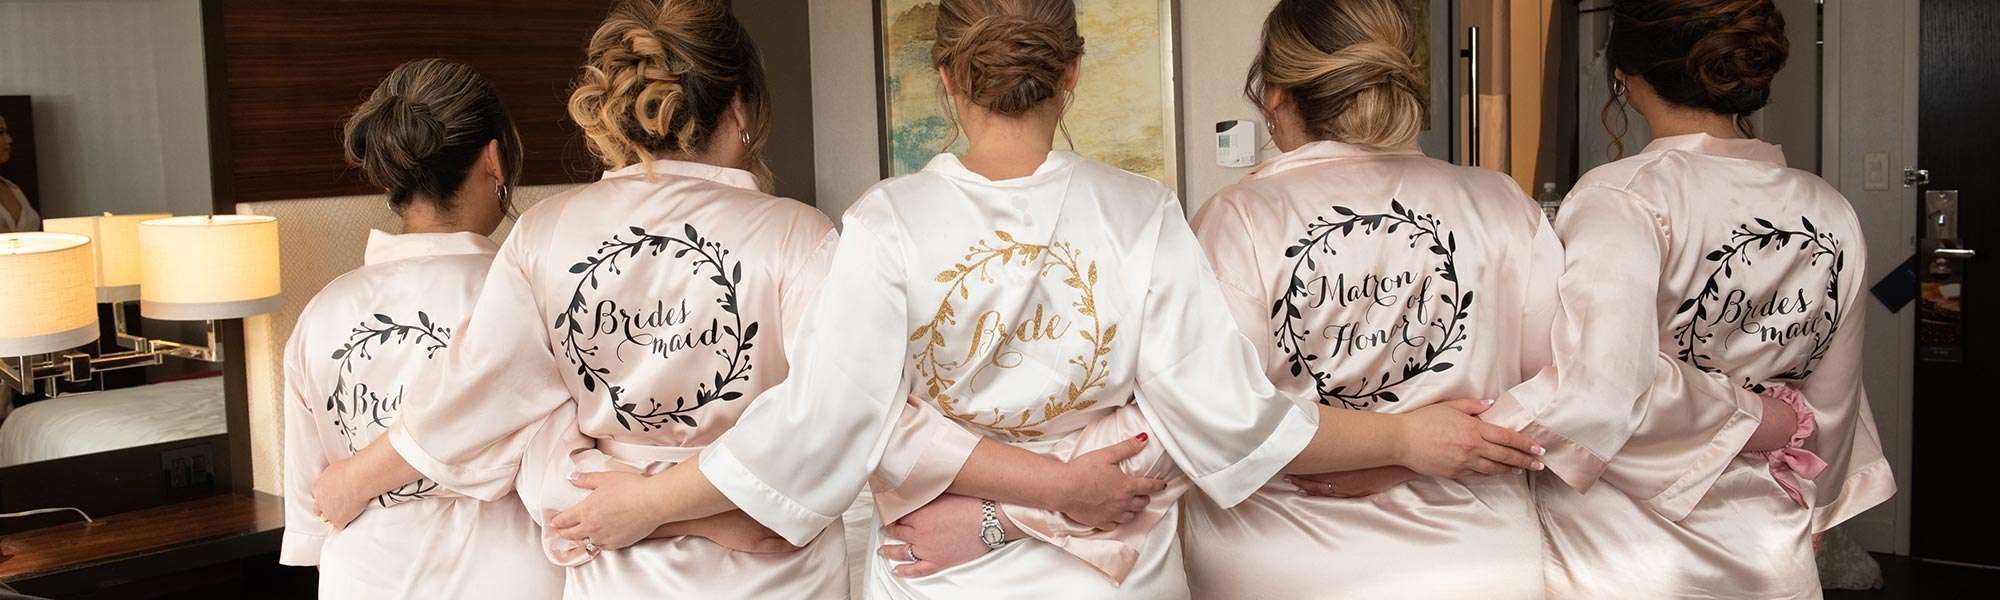 Bride and bridesmaids in personalized robes